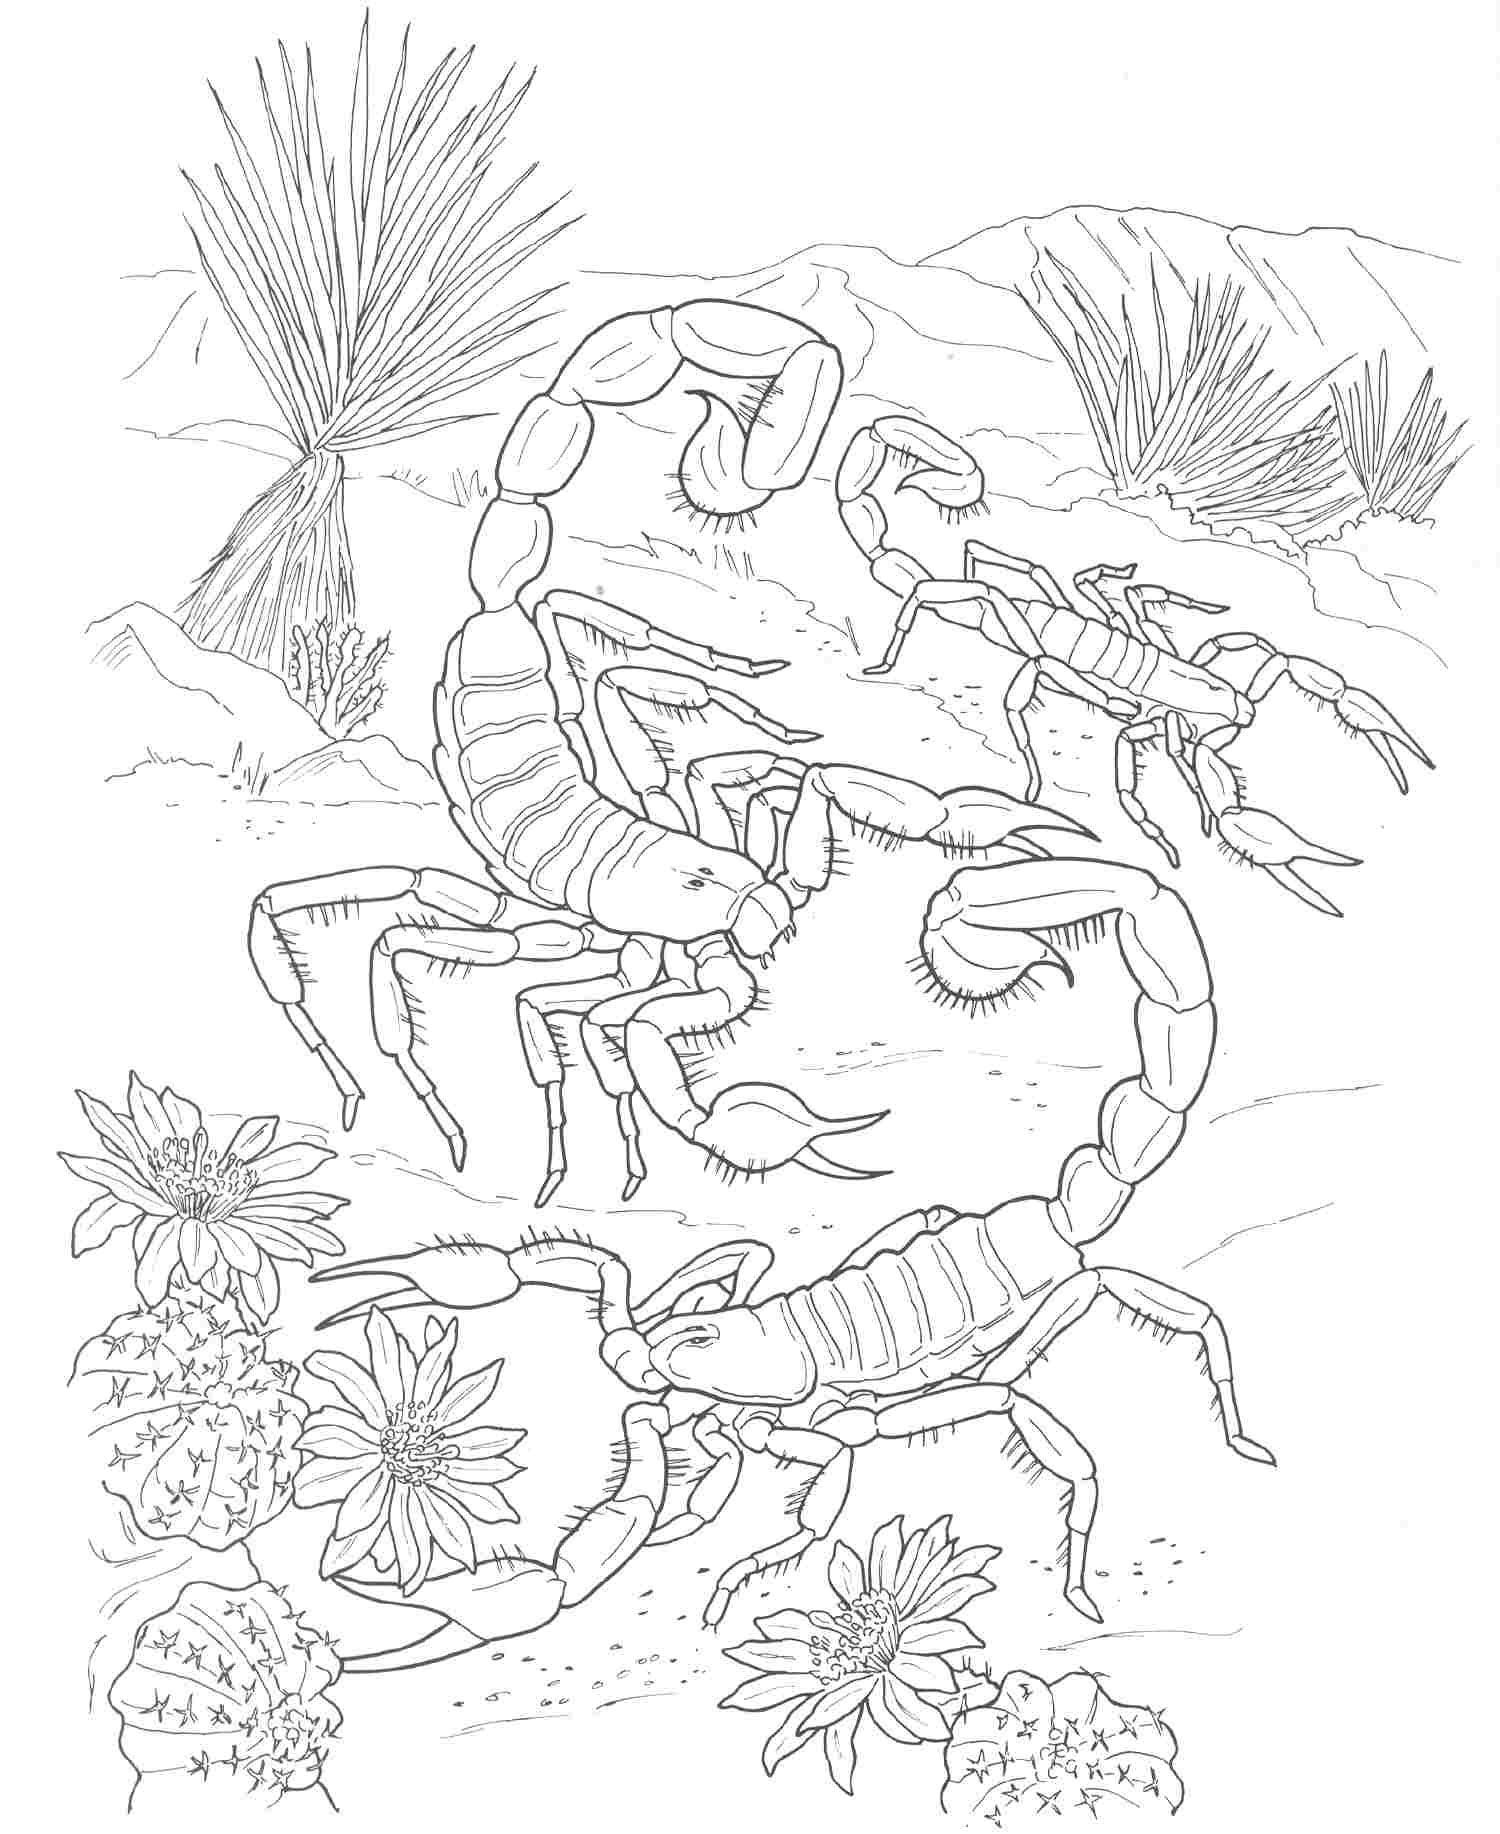 coloring pages for adults realistic animals - Google Search ...